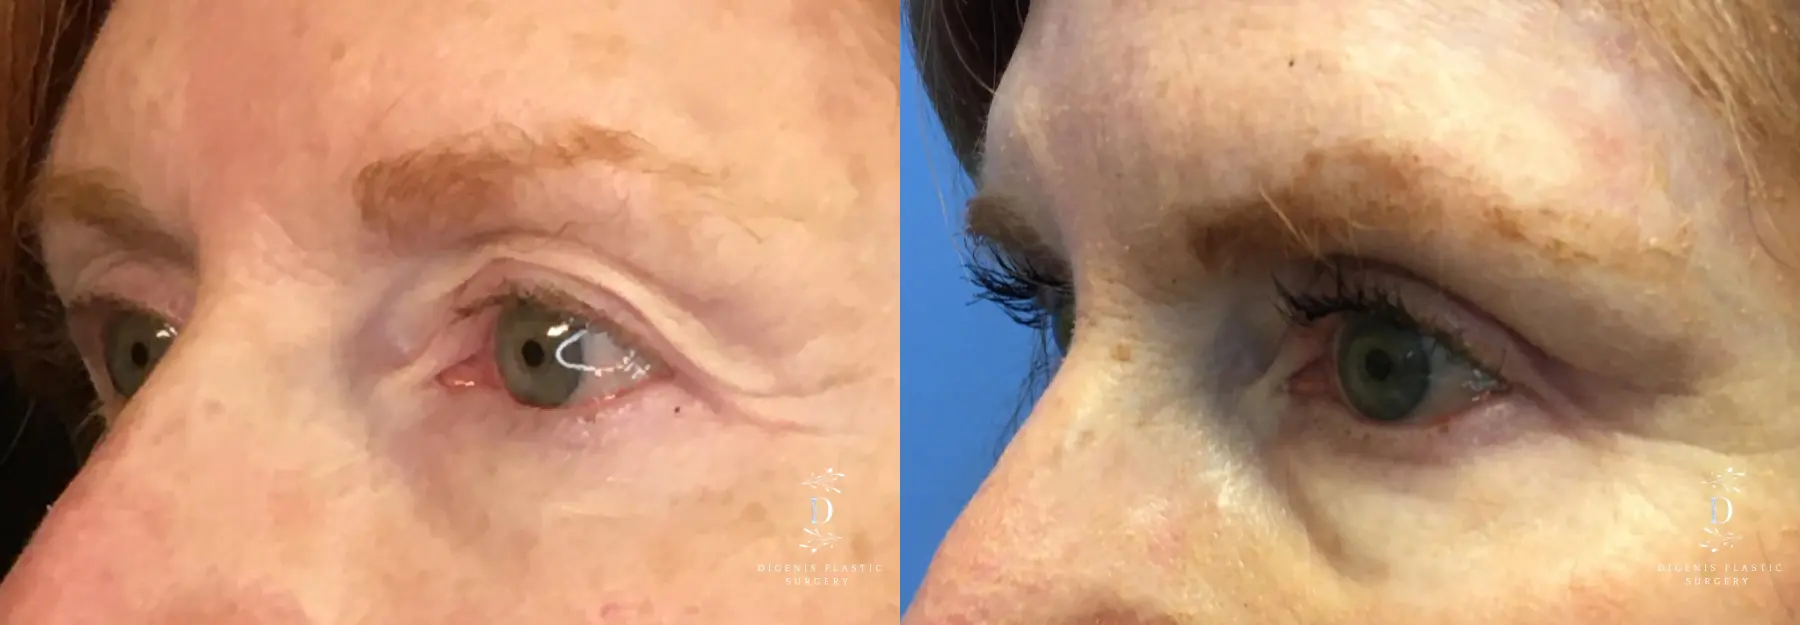 Eyelid Surgery: Patient 15 - Before and After 4